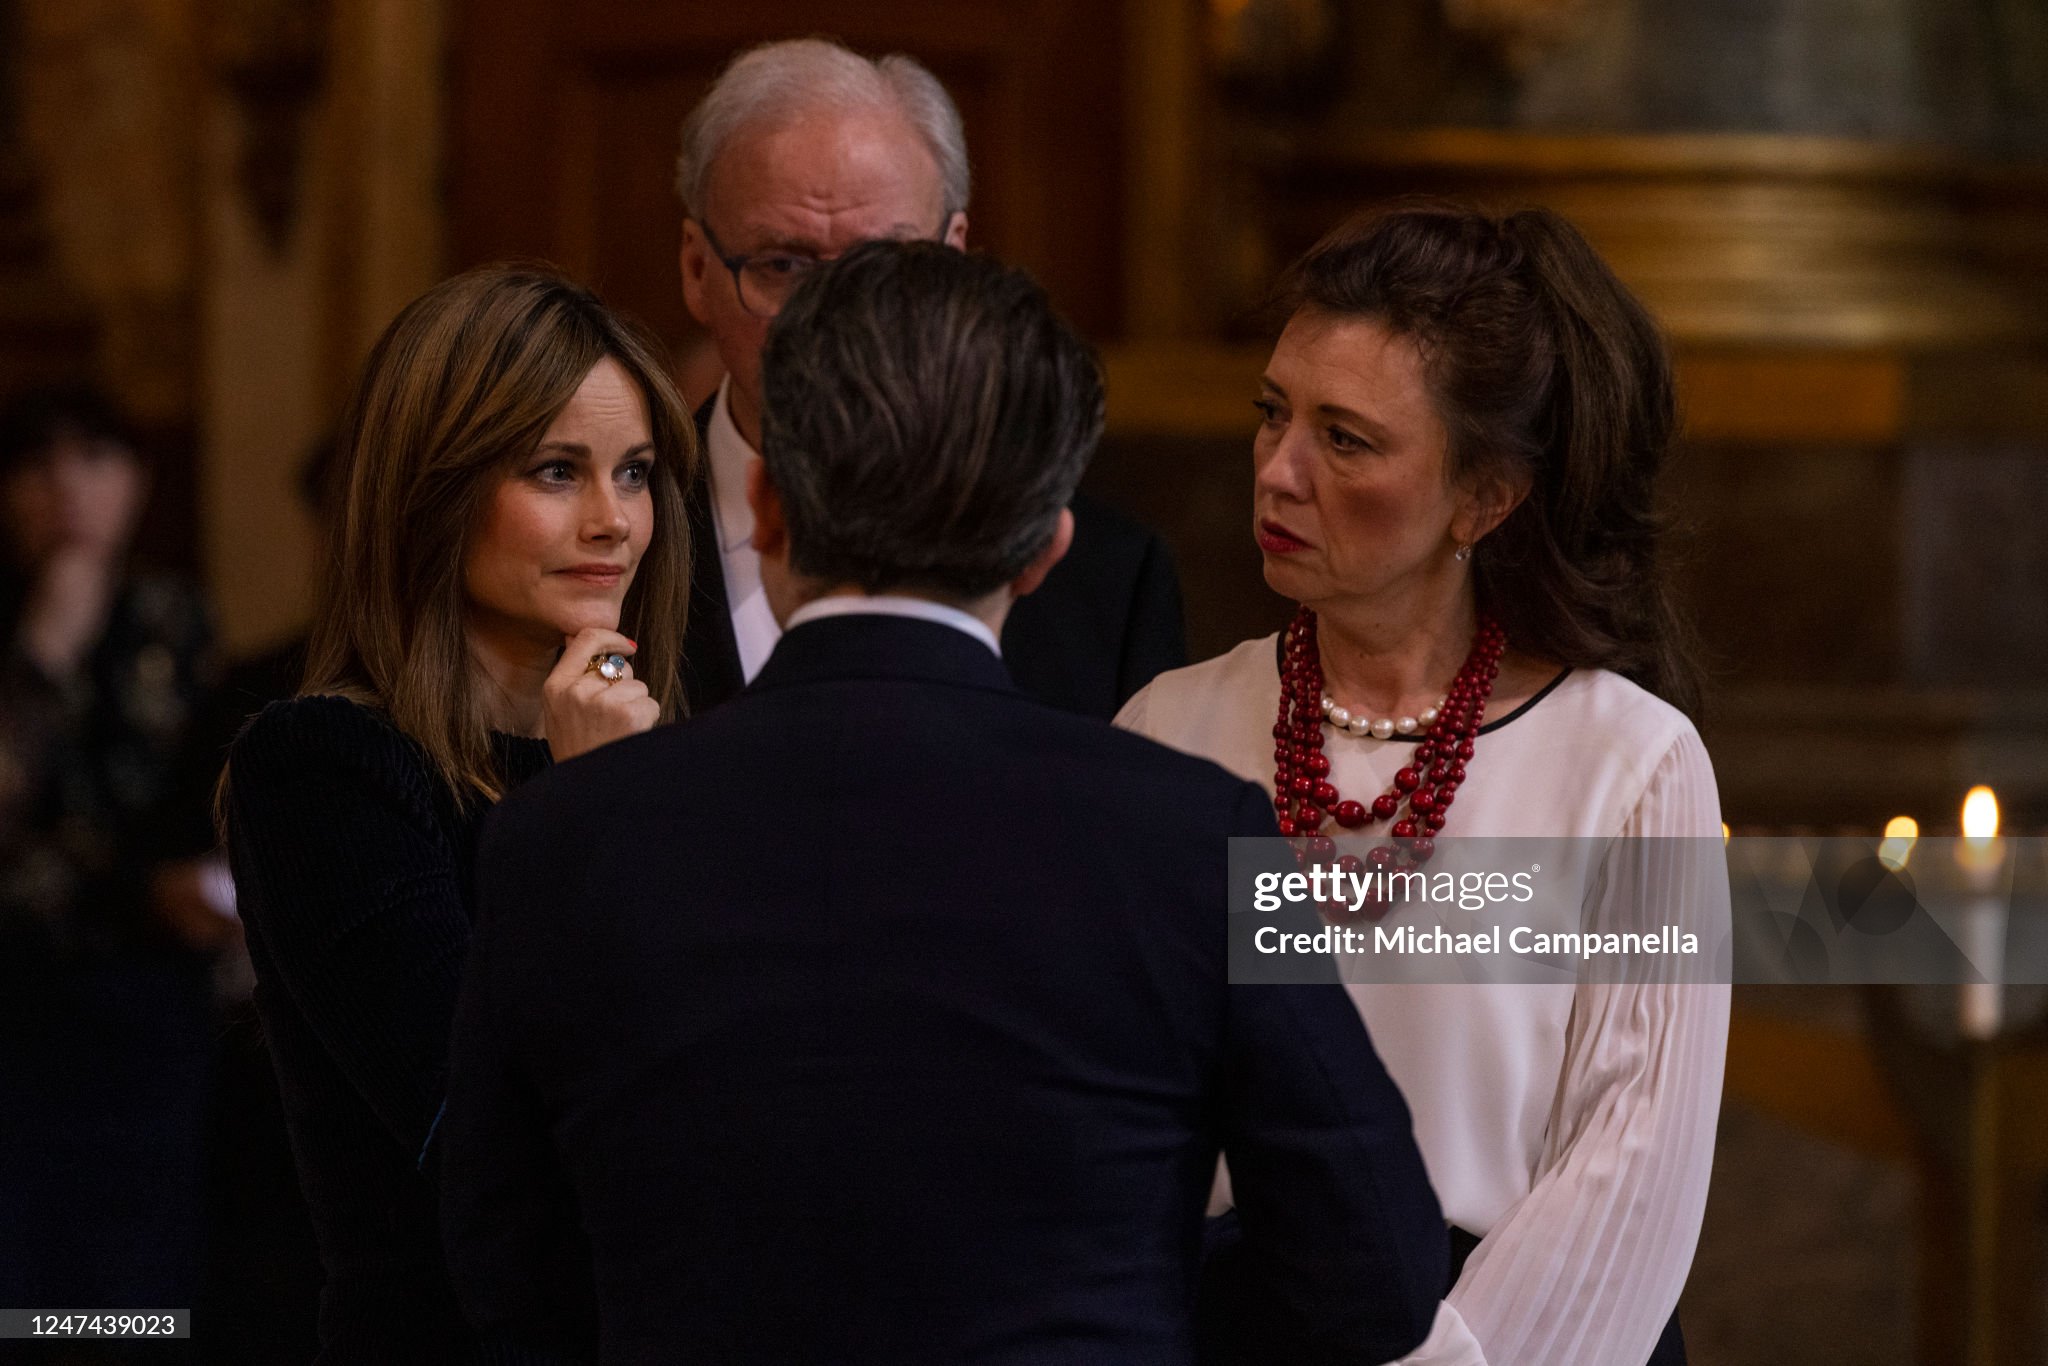 princess-sofia-of-sweden-attends-a-peace-prayer-marking-the-one-year-anniversary-since-the.jpg